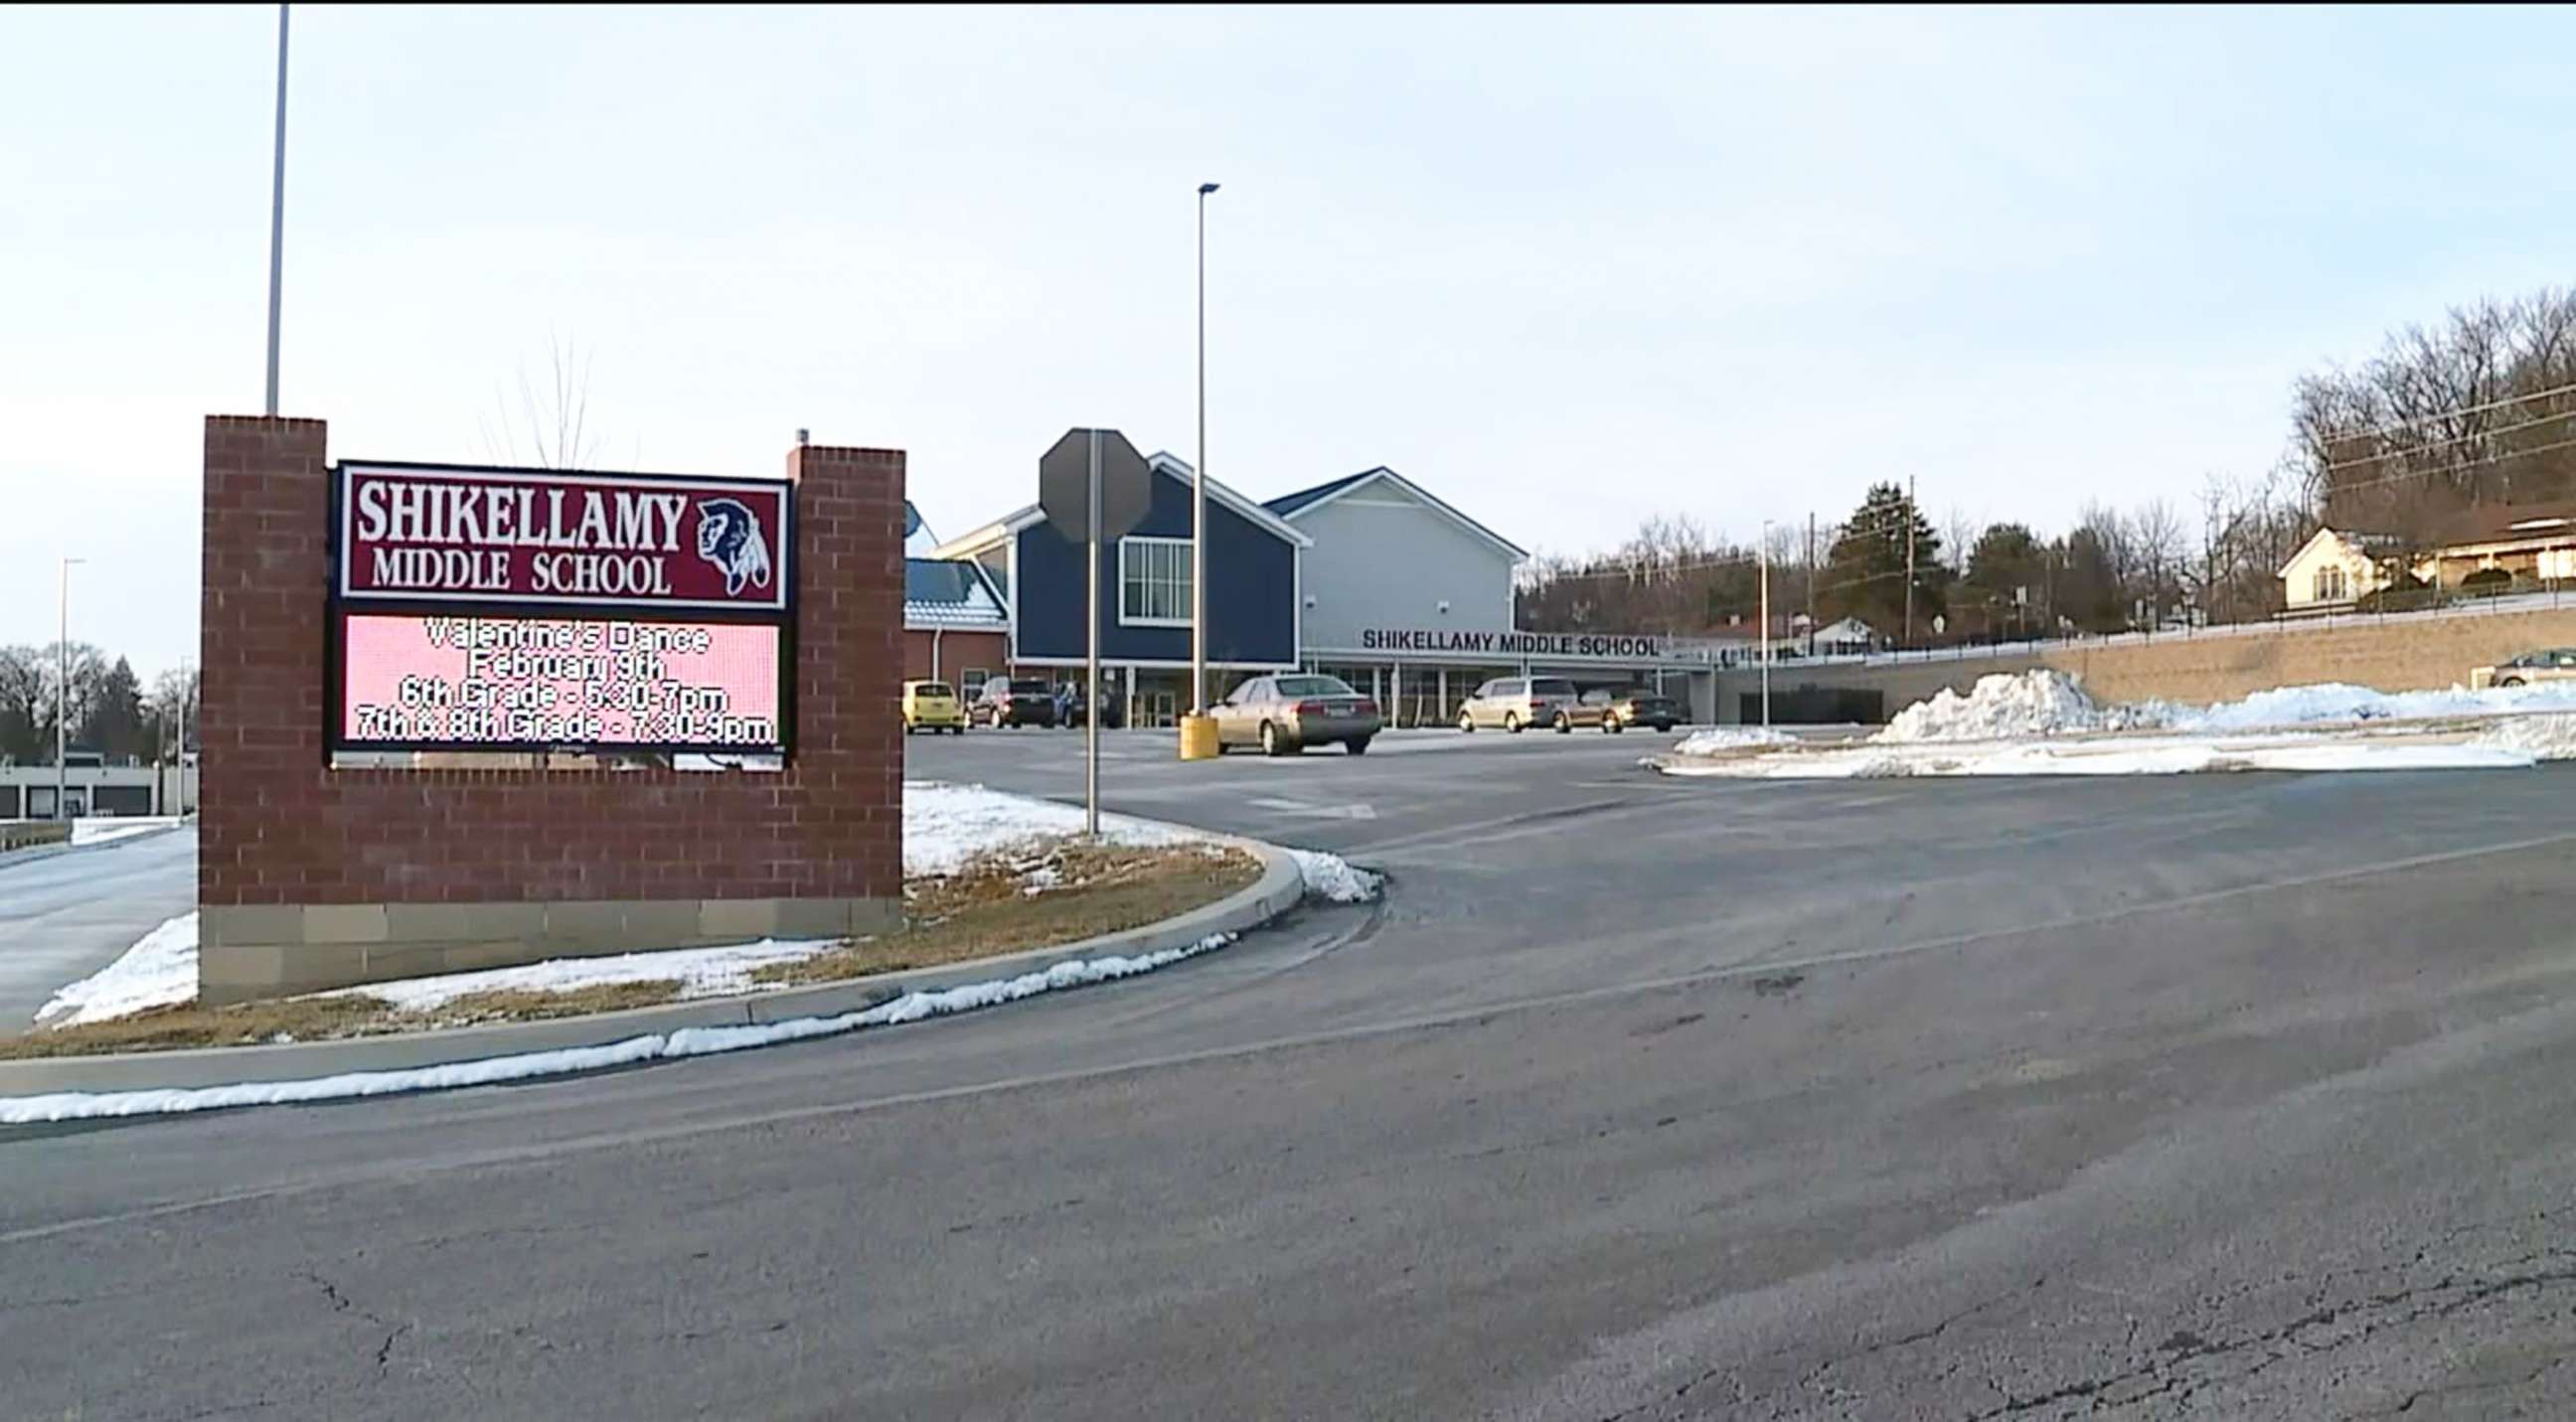 PHOTO: The entrance to Shikellamy Middle School is pictured in this image captured from video.